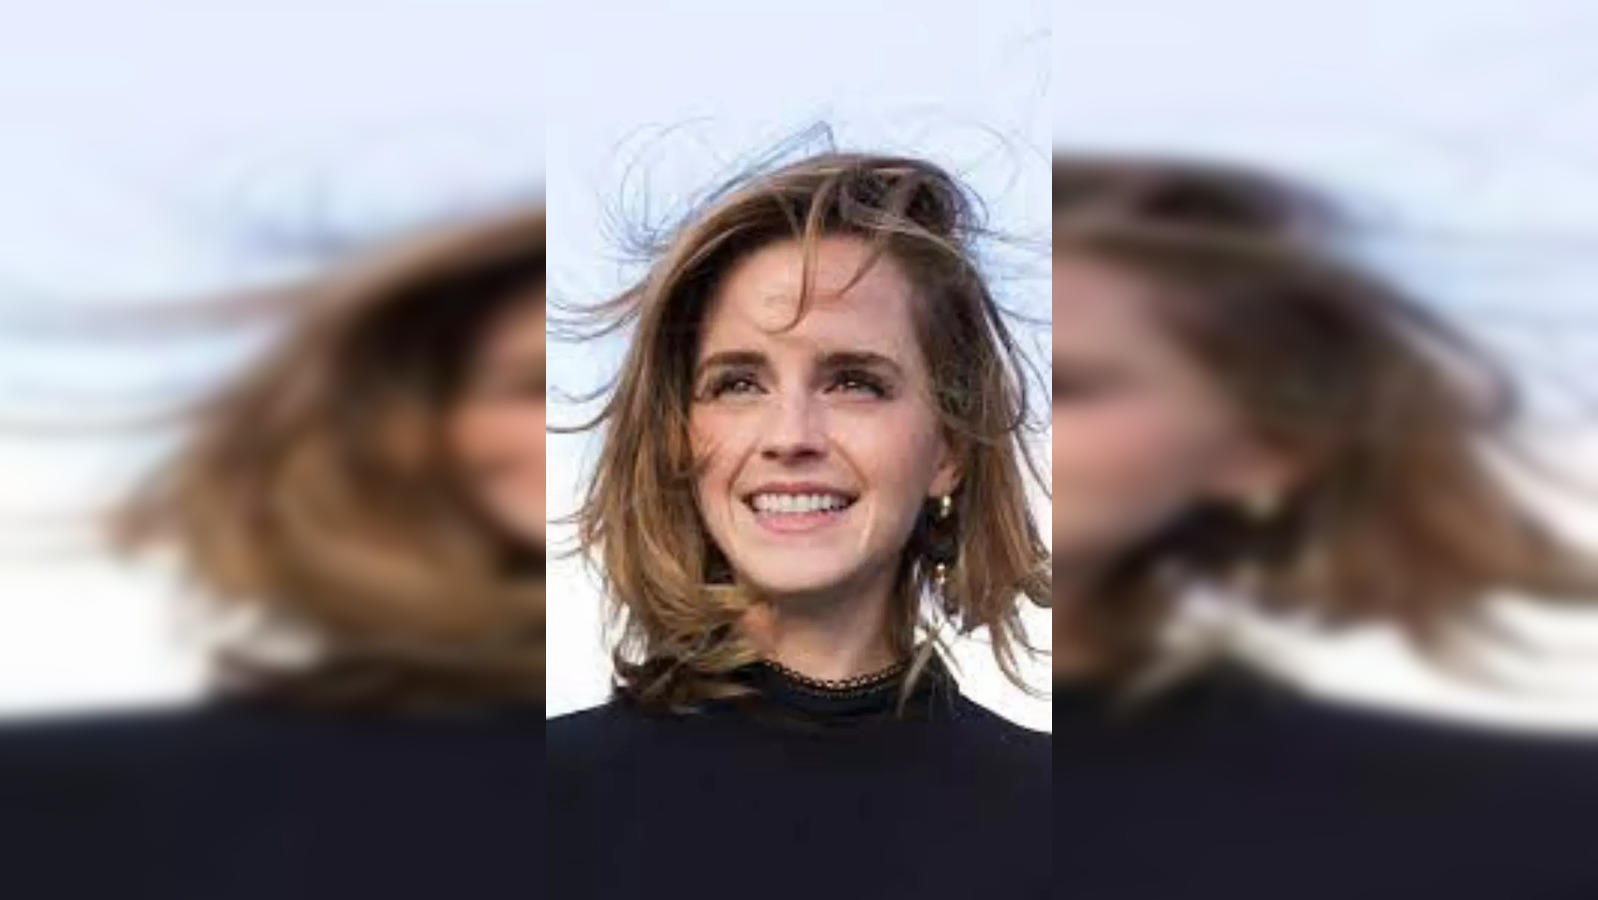 emma watson: Emma Watson Birthday: 15 things to know about Hermione Granger  from Harry Potter series - The Economic Times